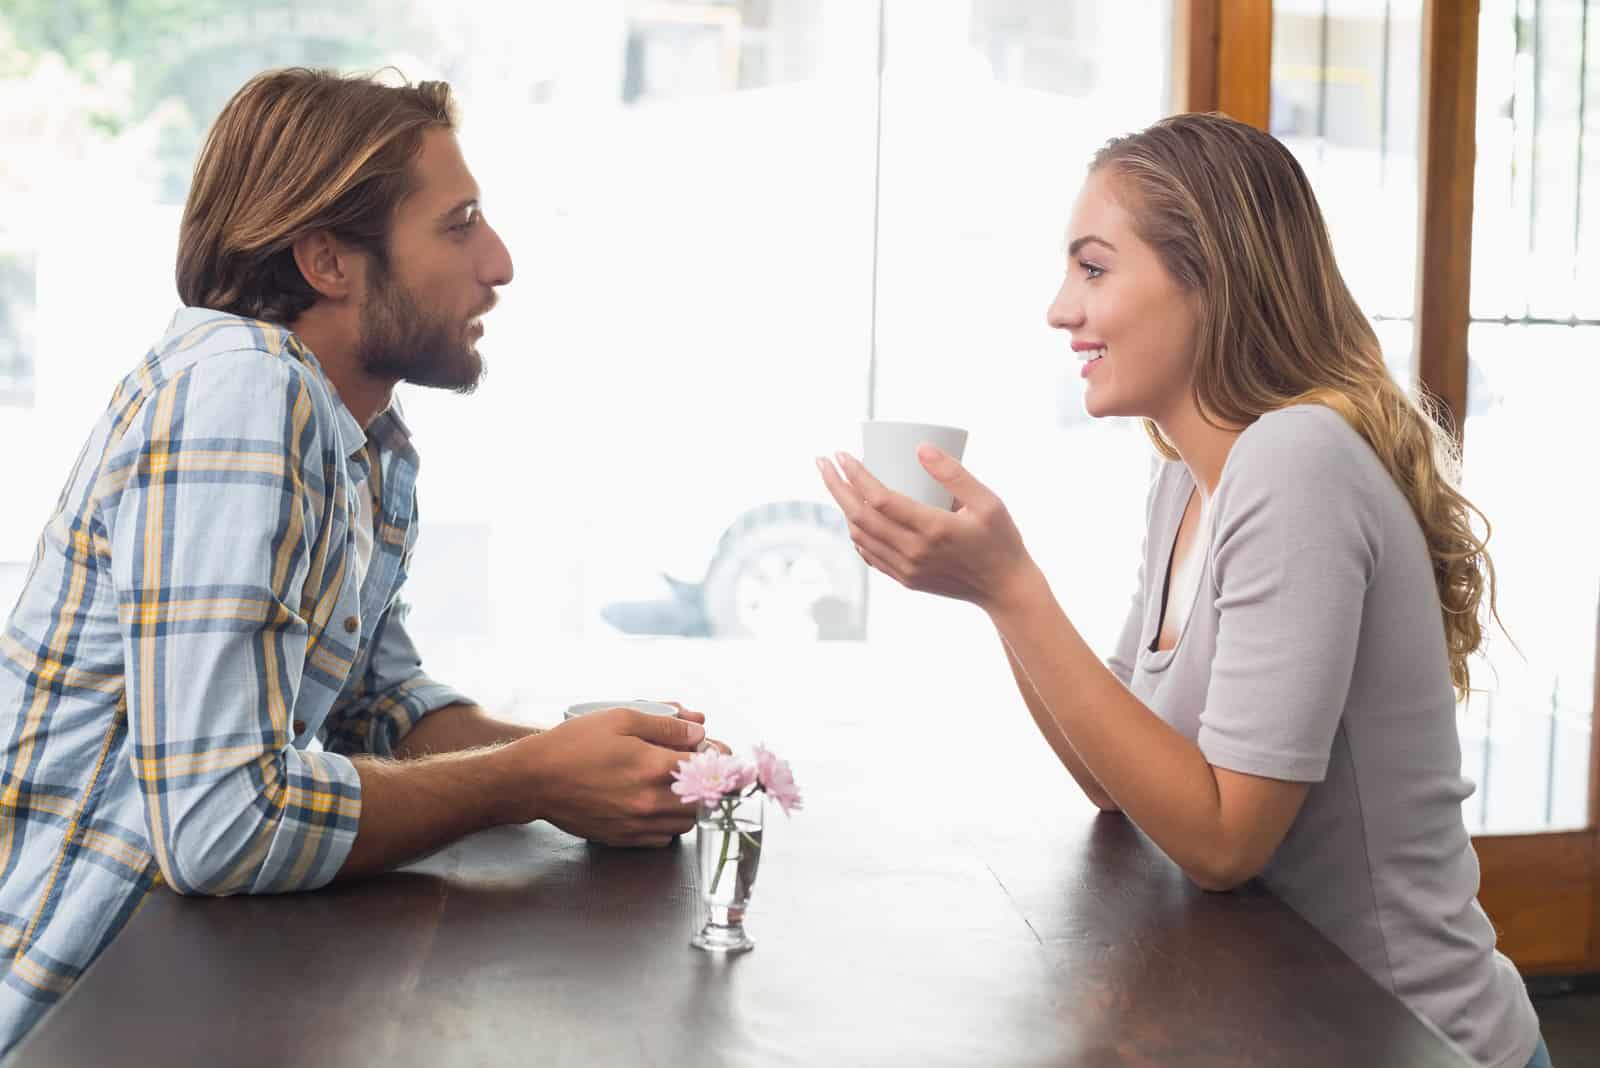 a smiling woman sits at a table with a salt shaker in her hand and talks to a man